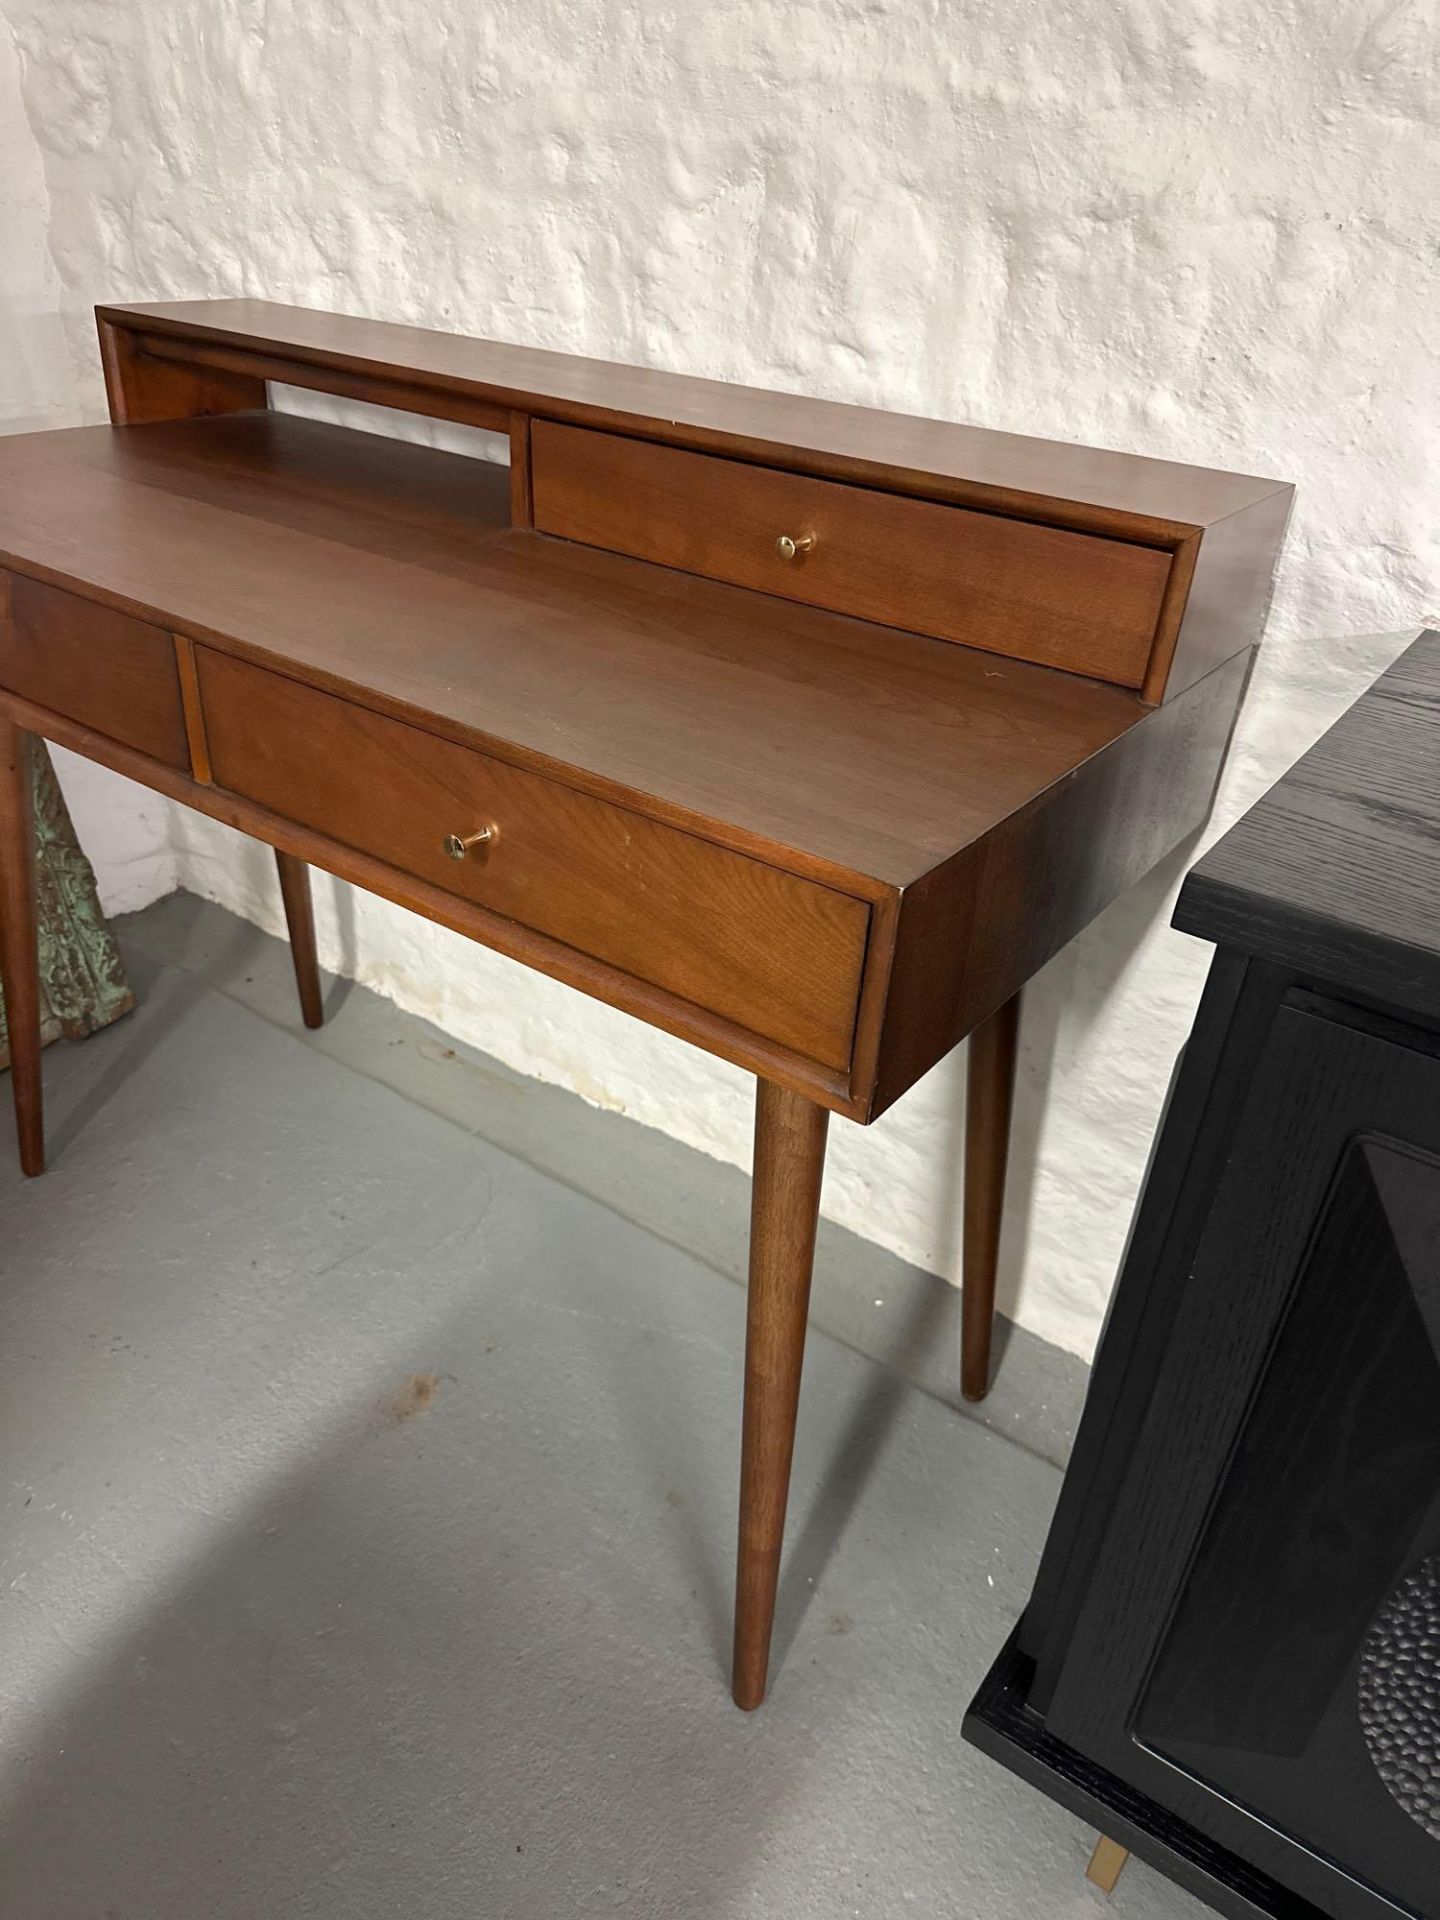 Bailey Desk and Stool Stylish deep brown tones and a smooth finish make this dressing table/desk & - Bild 3 aus 11